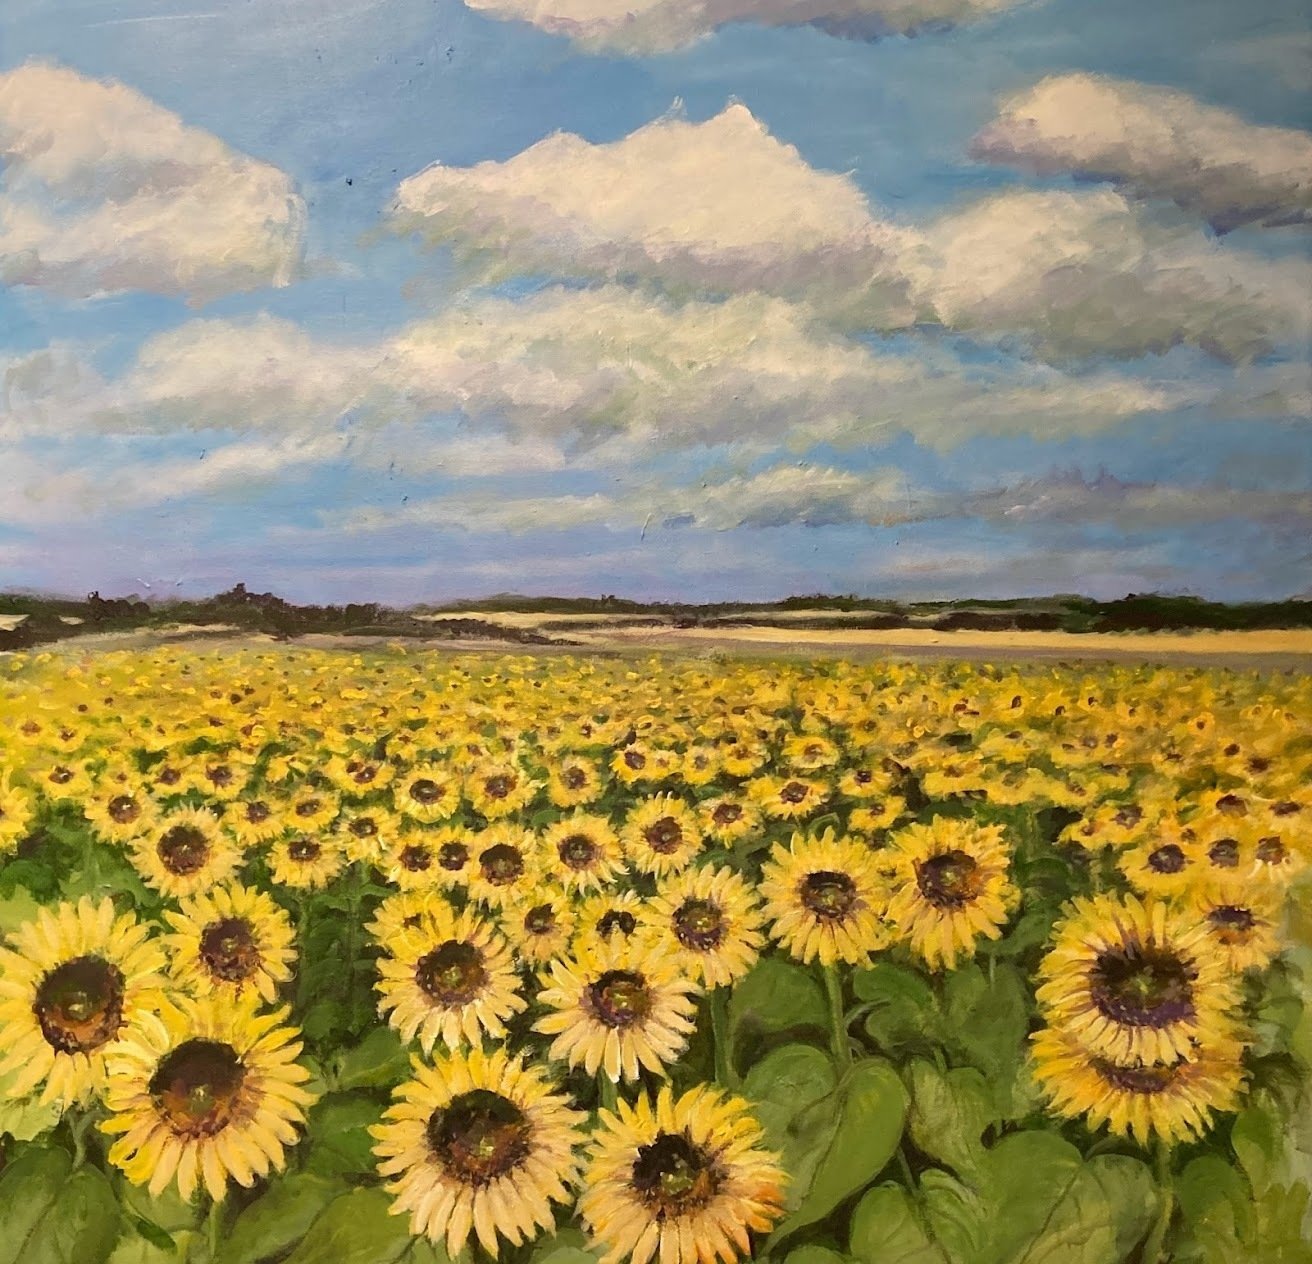 The Audience—Sunflowers